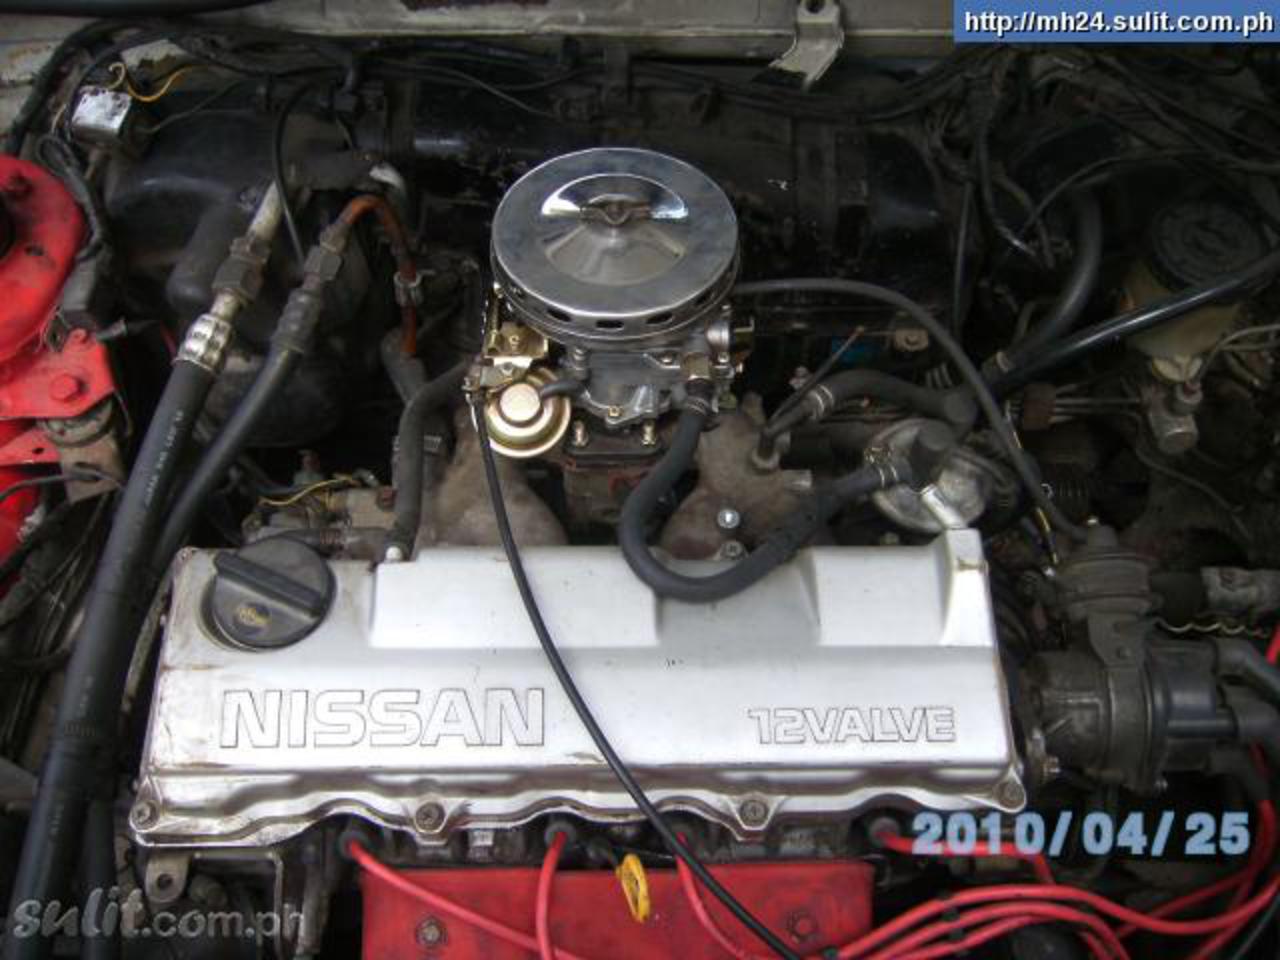 Nissan Stanza 16 SGX. View Download Wallpaper. 640x480. Comments